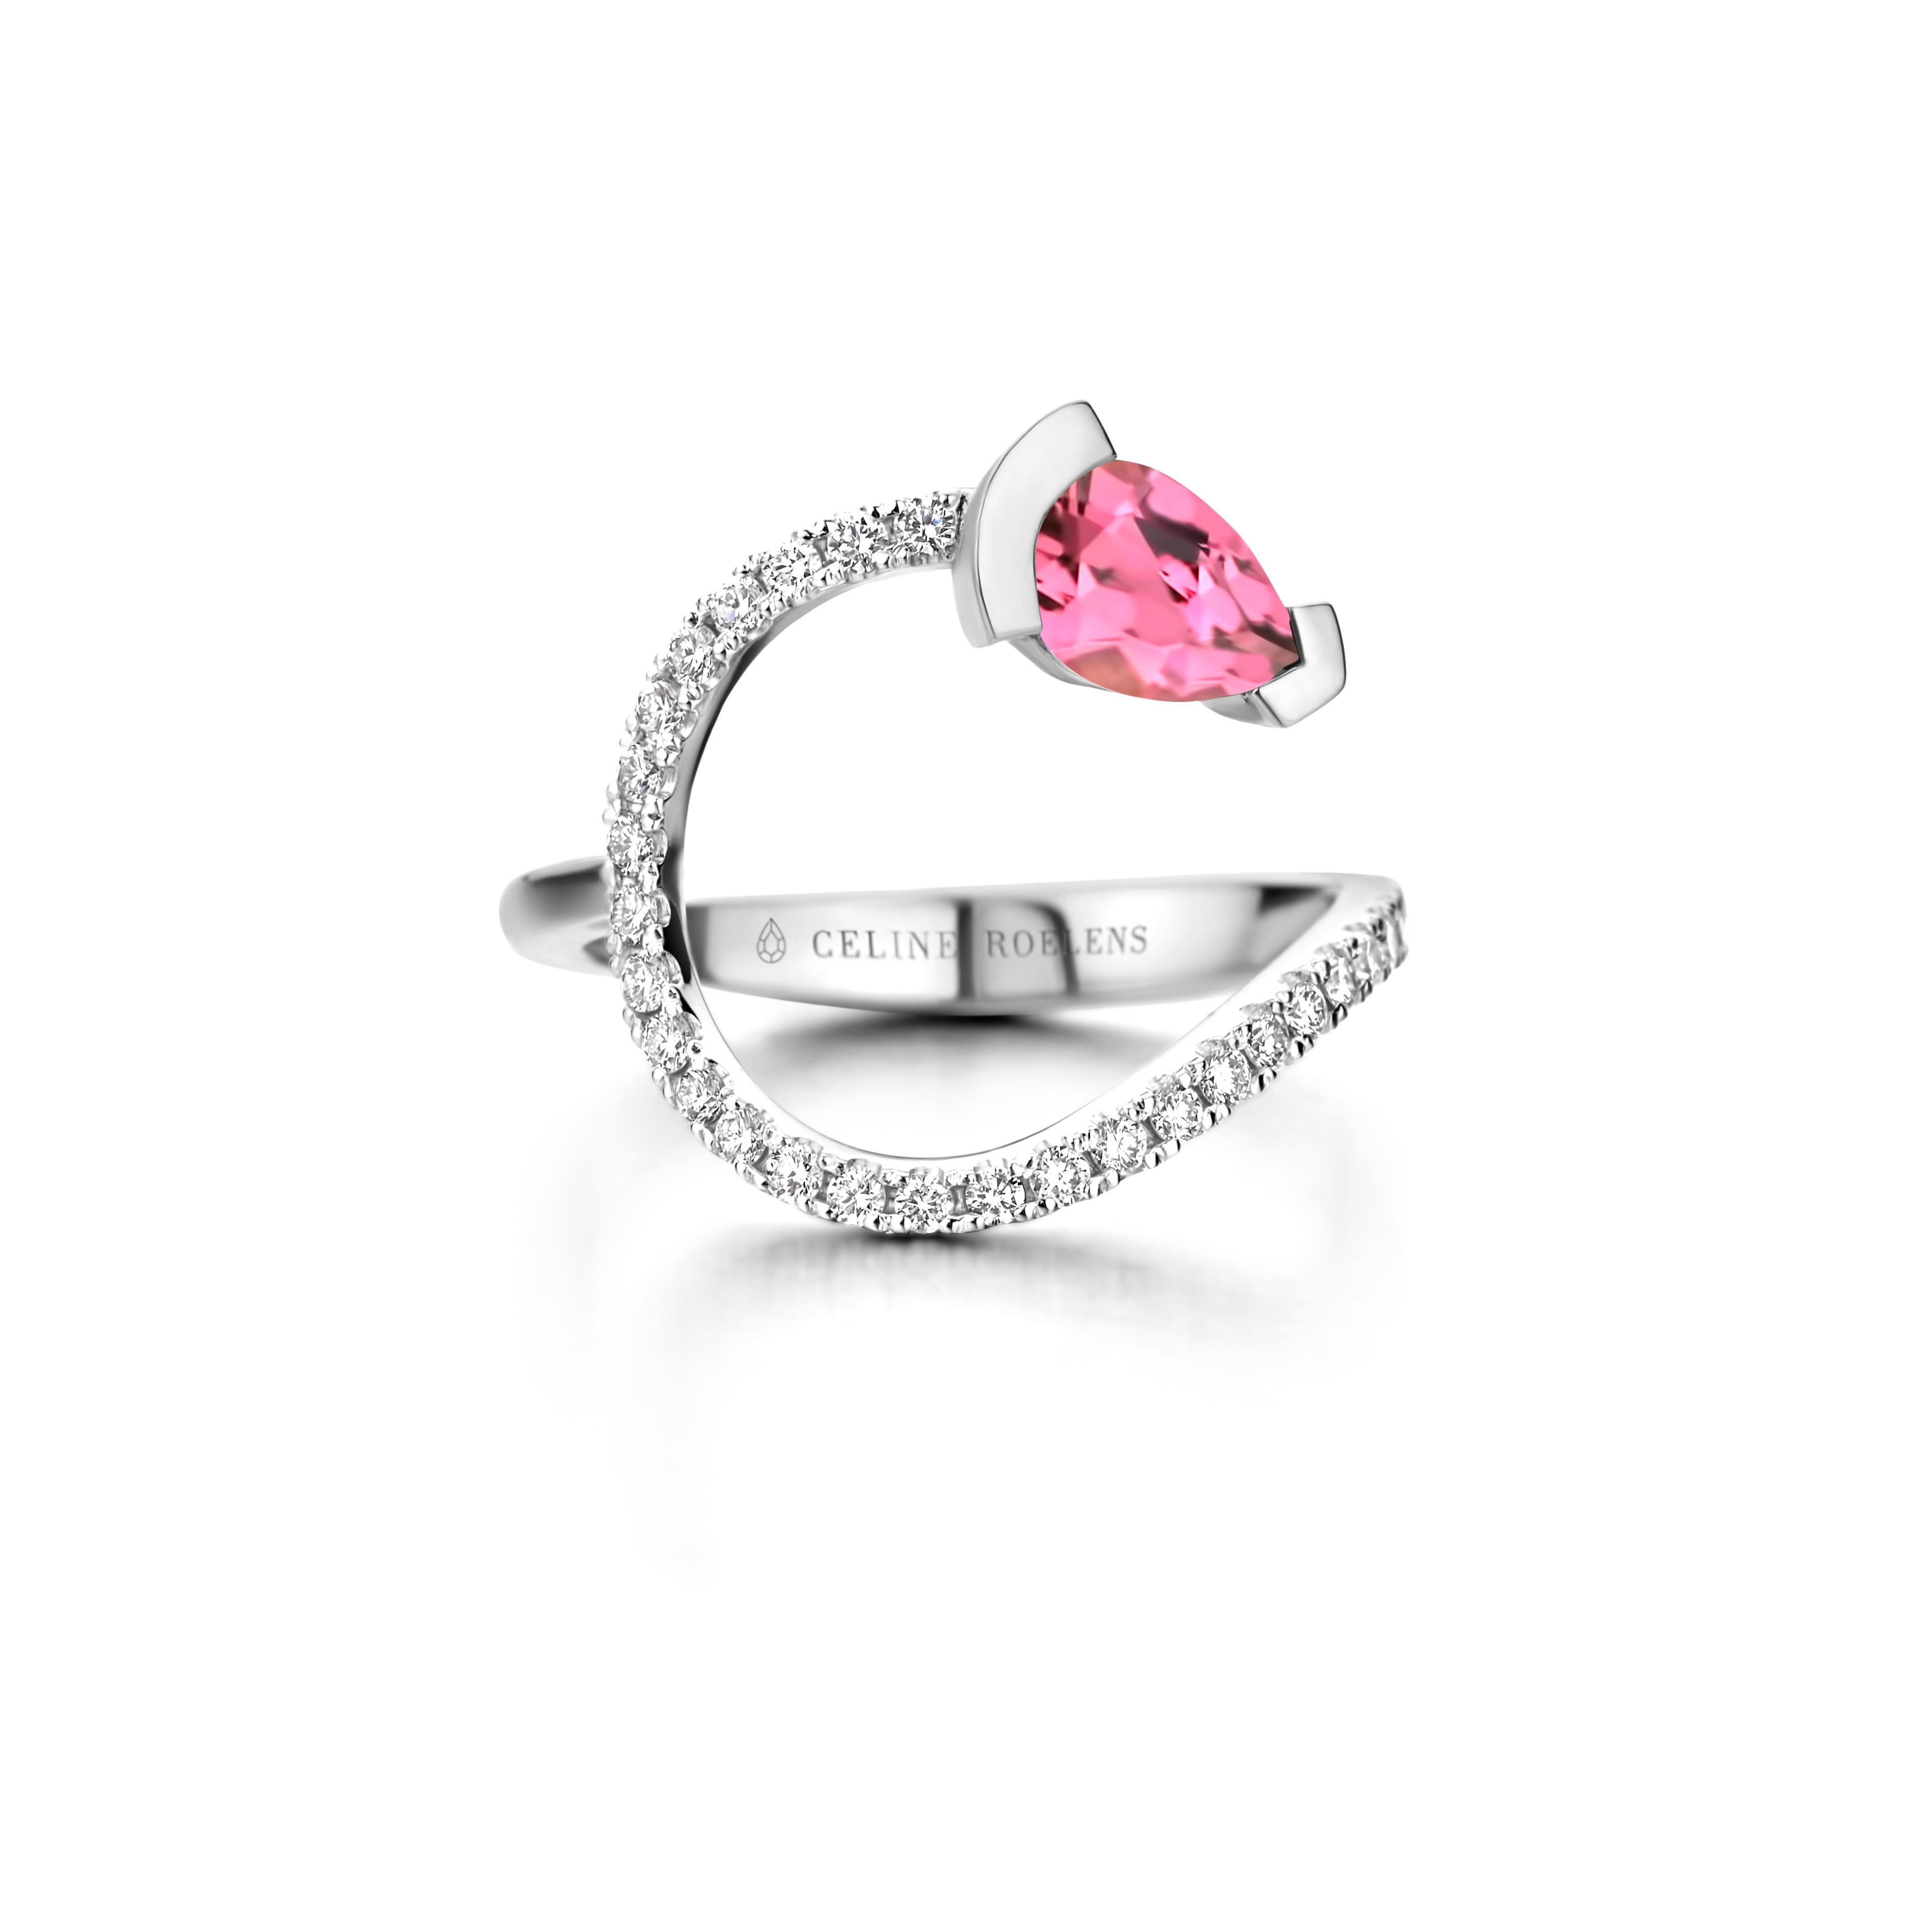 ADELINE curved ring in 18Kt rose gold set with a pear shaped Pink tourmaline and 0,33 Ct of white brilliant cut diamonds - VS F quality.